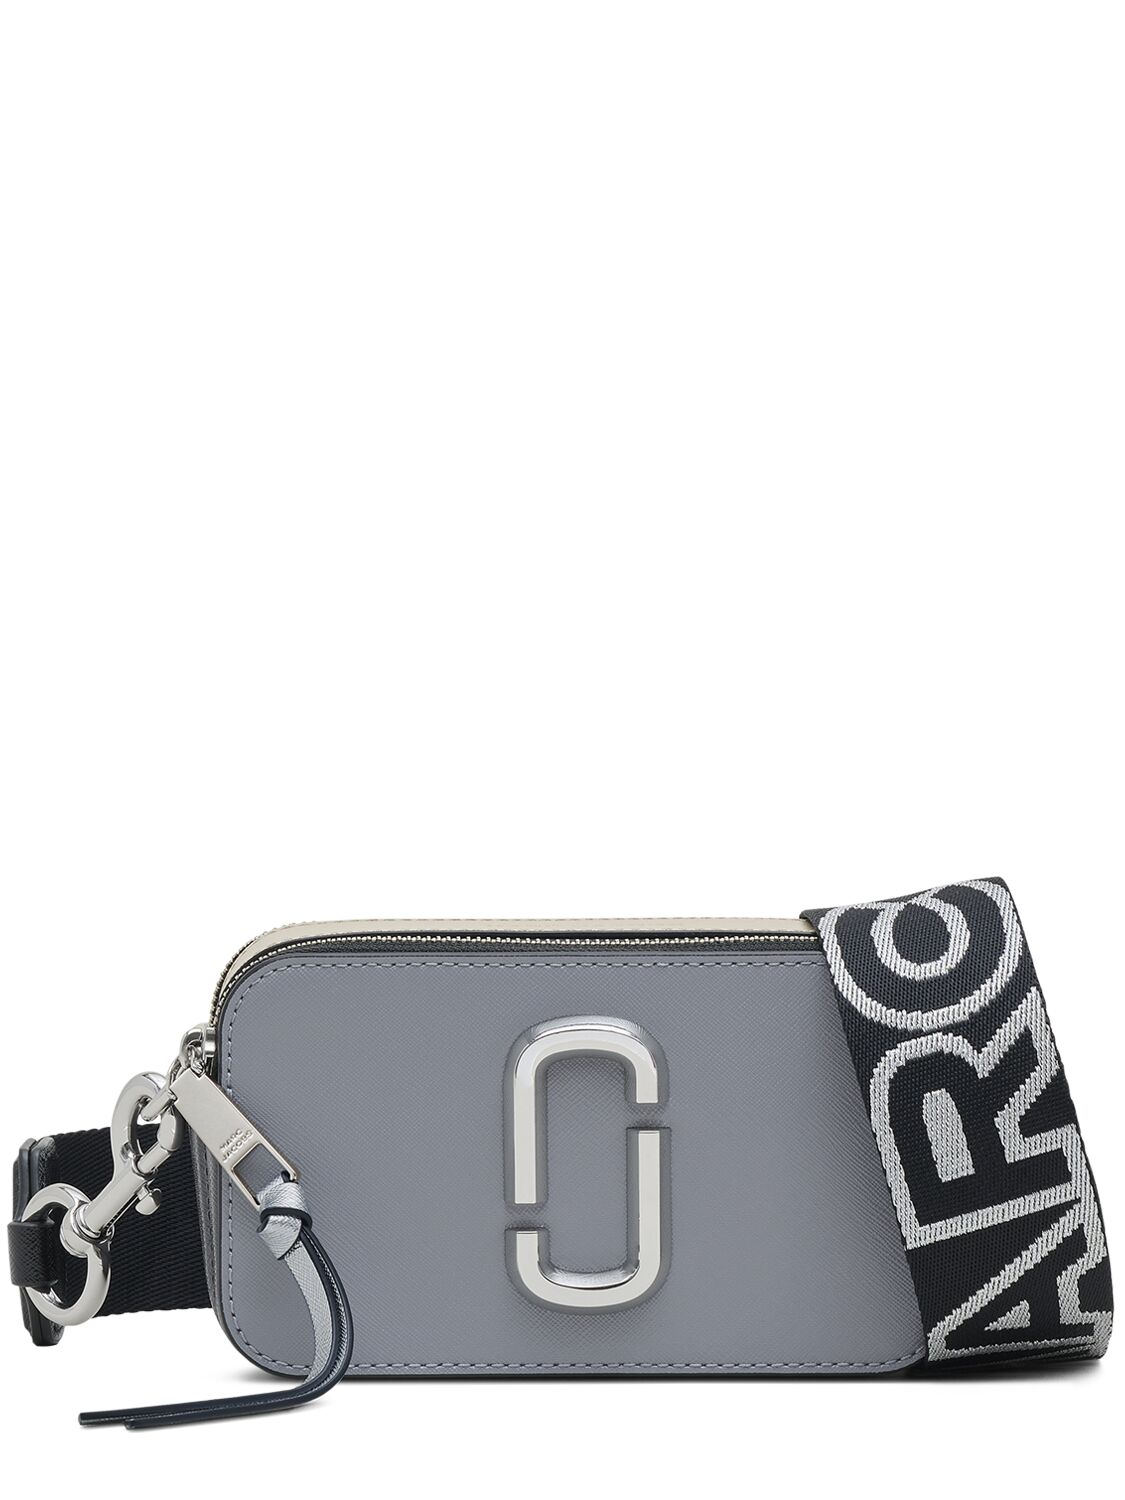 Marc Jacobs The Snapshot Shoulder Bag In Wolf Grey Multi